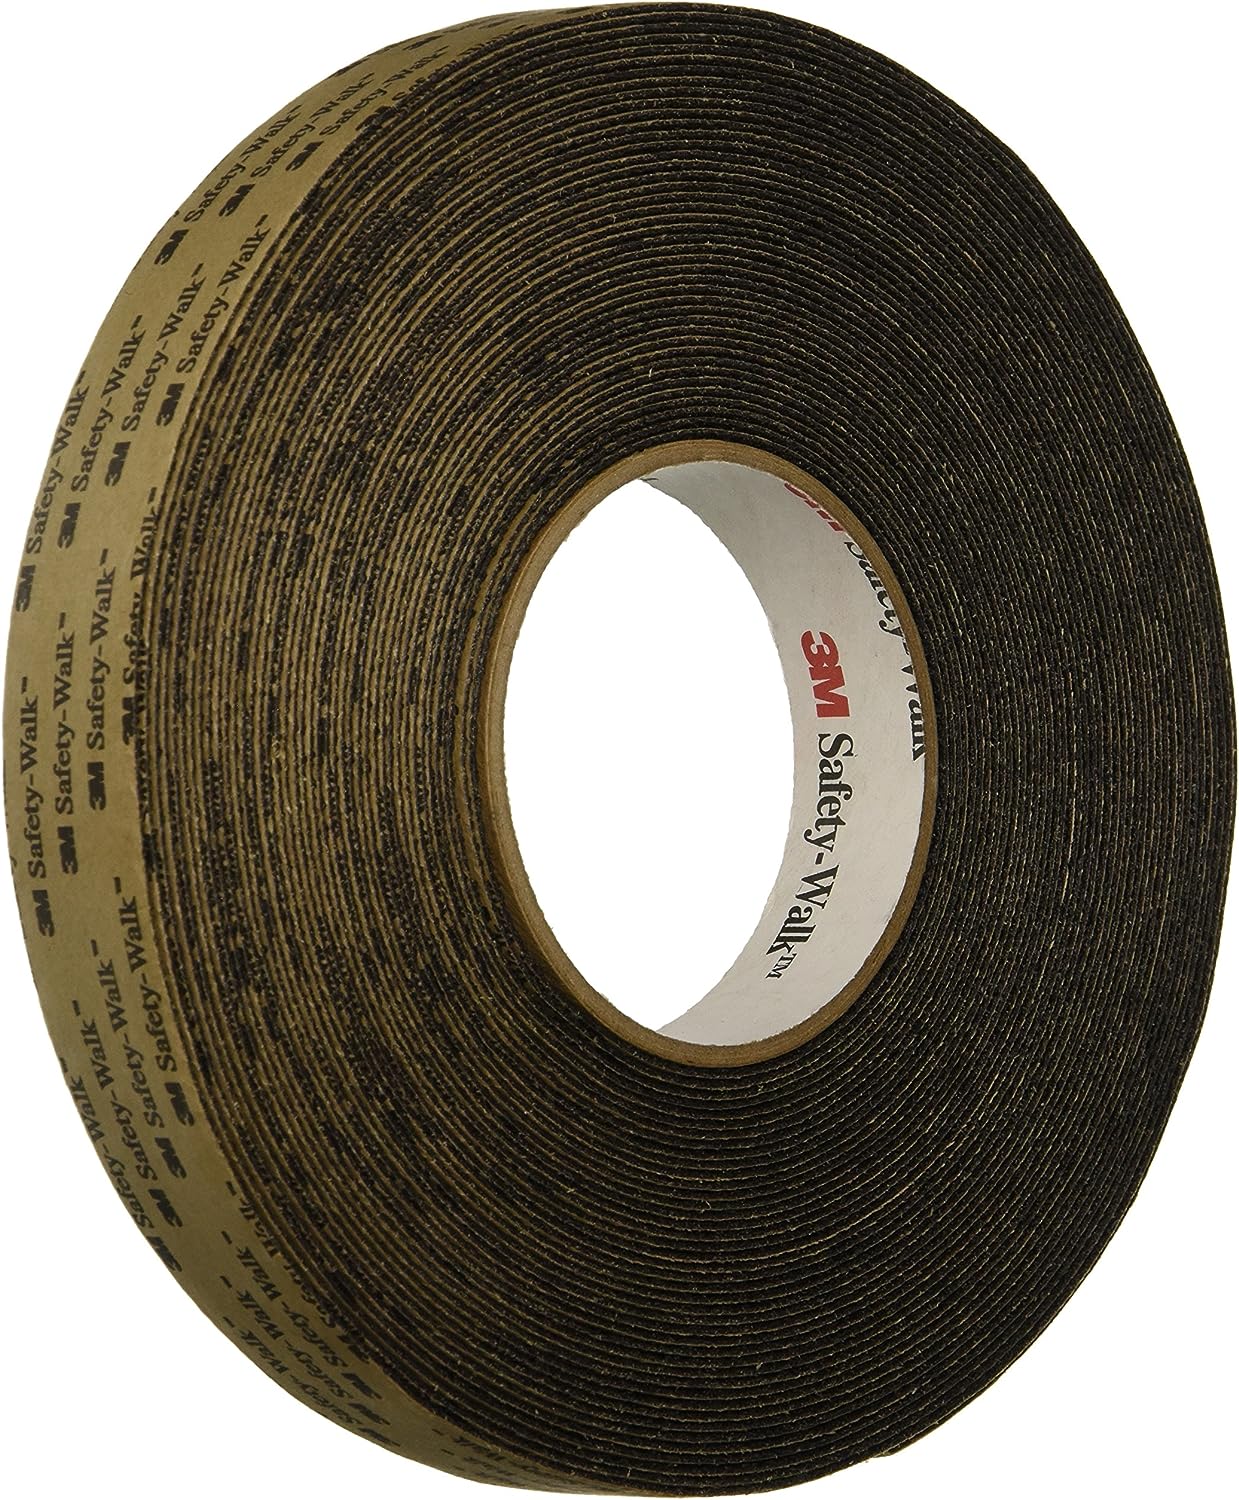 3M Safety-Walk 310 Slip-Resistant Medium Resilient Tread Roll 1 Inch x 60 Ft RRP 30.94 CLEARANCE XL 19.99